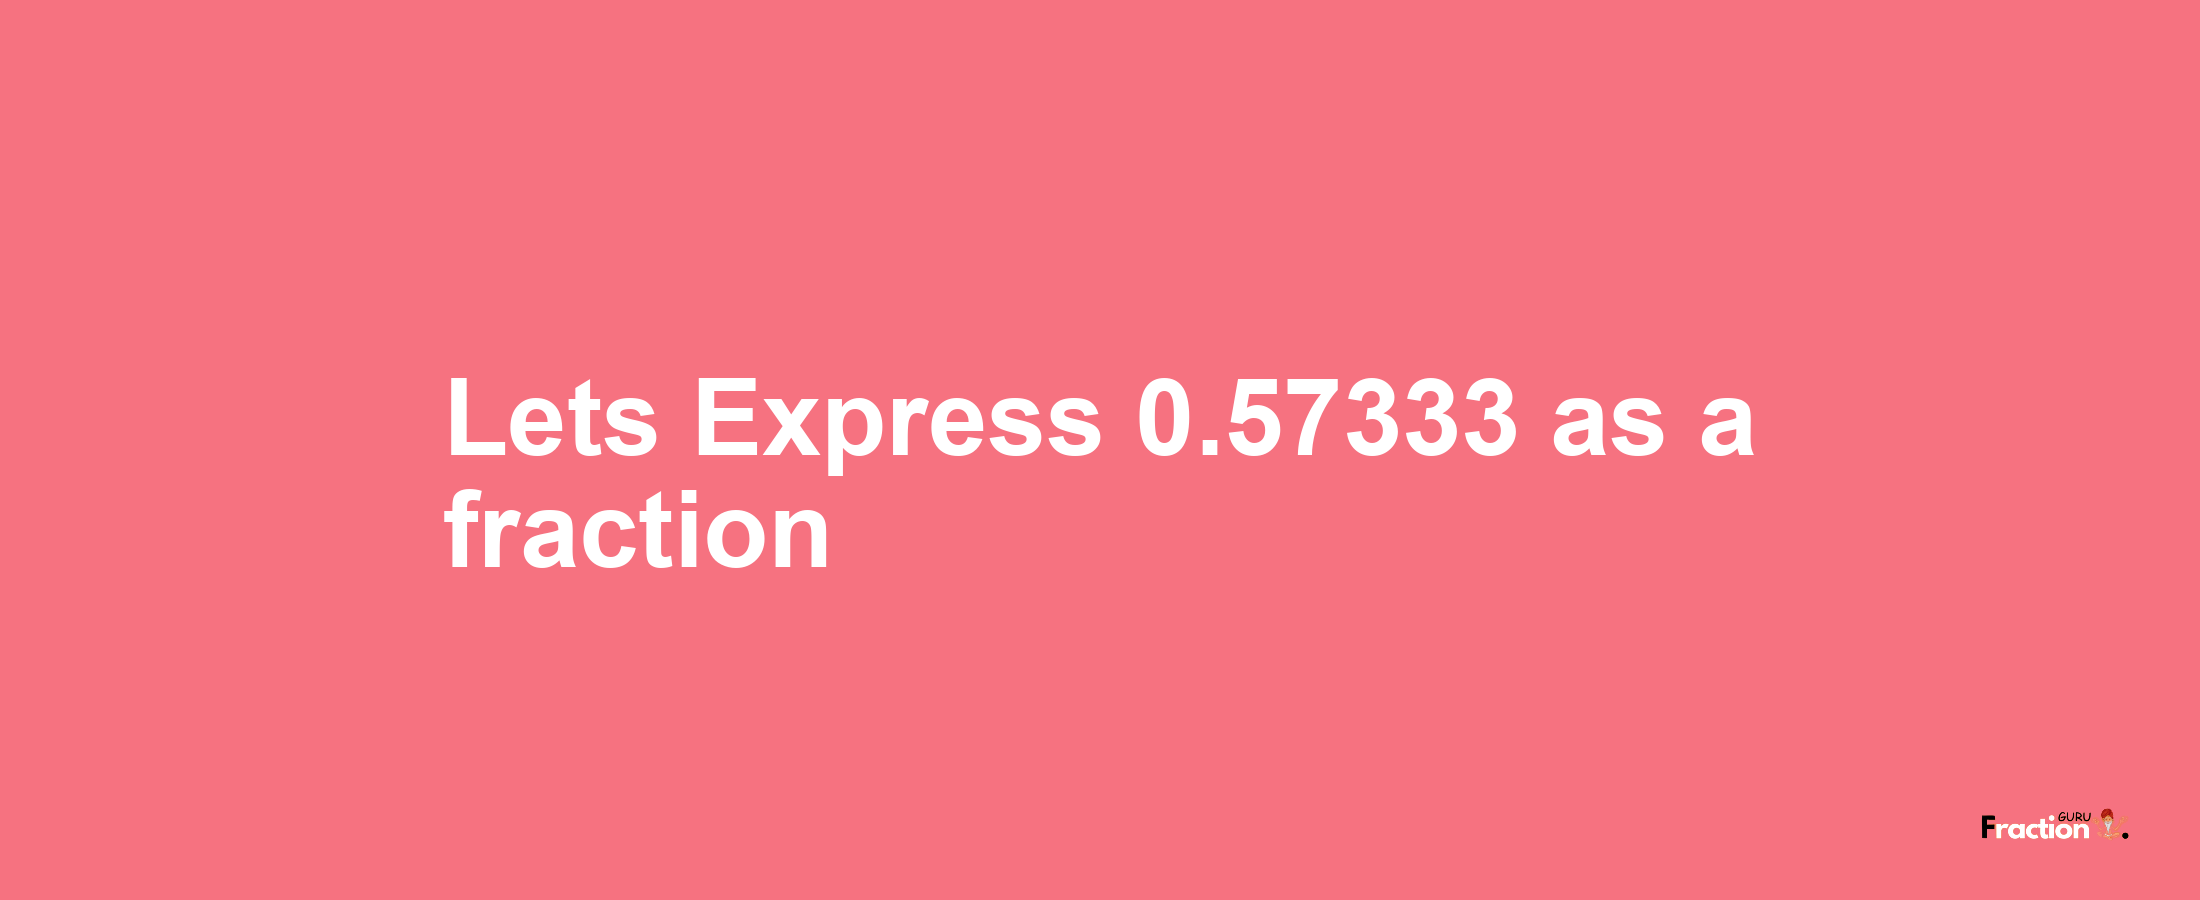 Lets Express 0.57333 as afraction